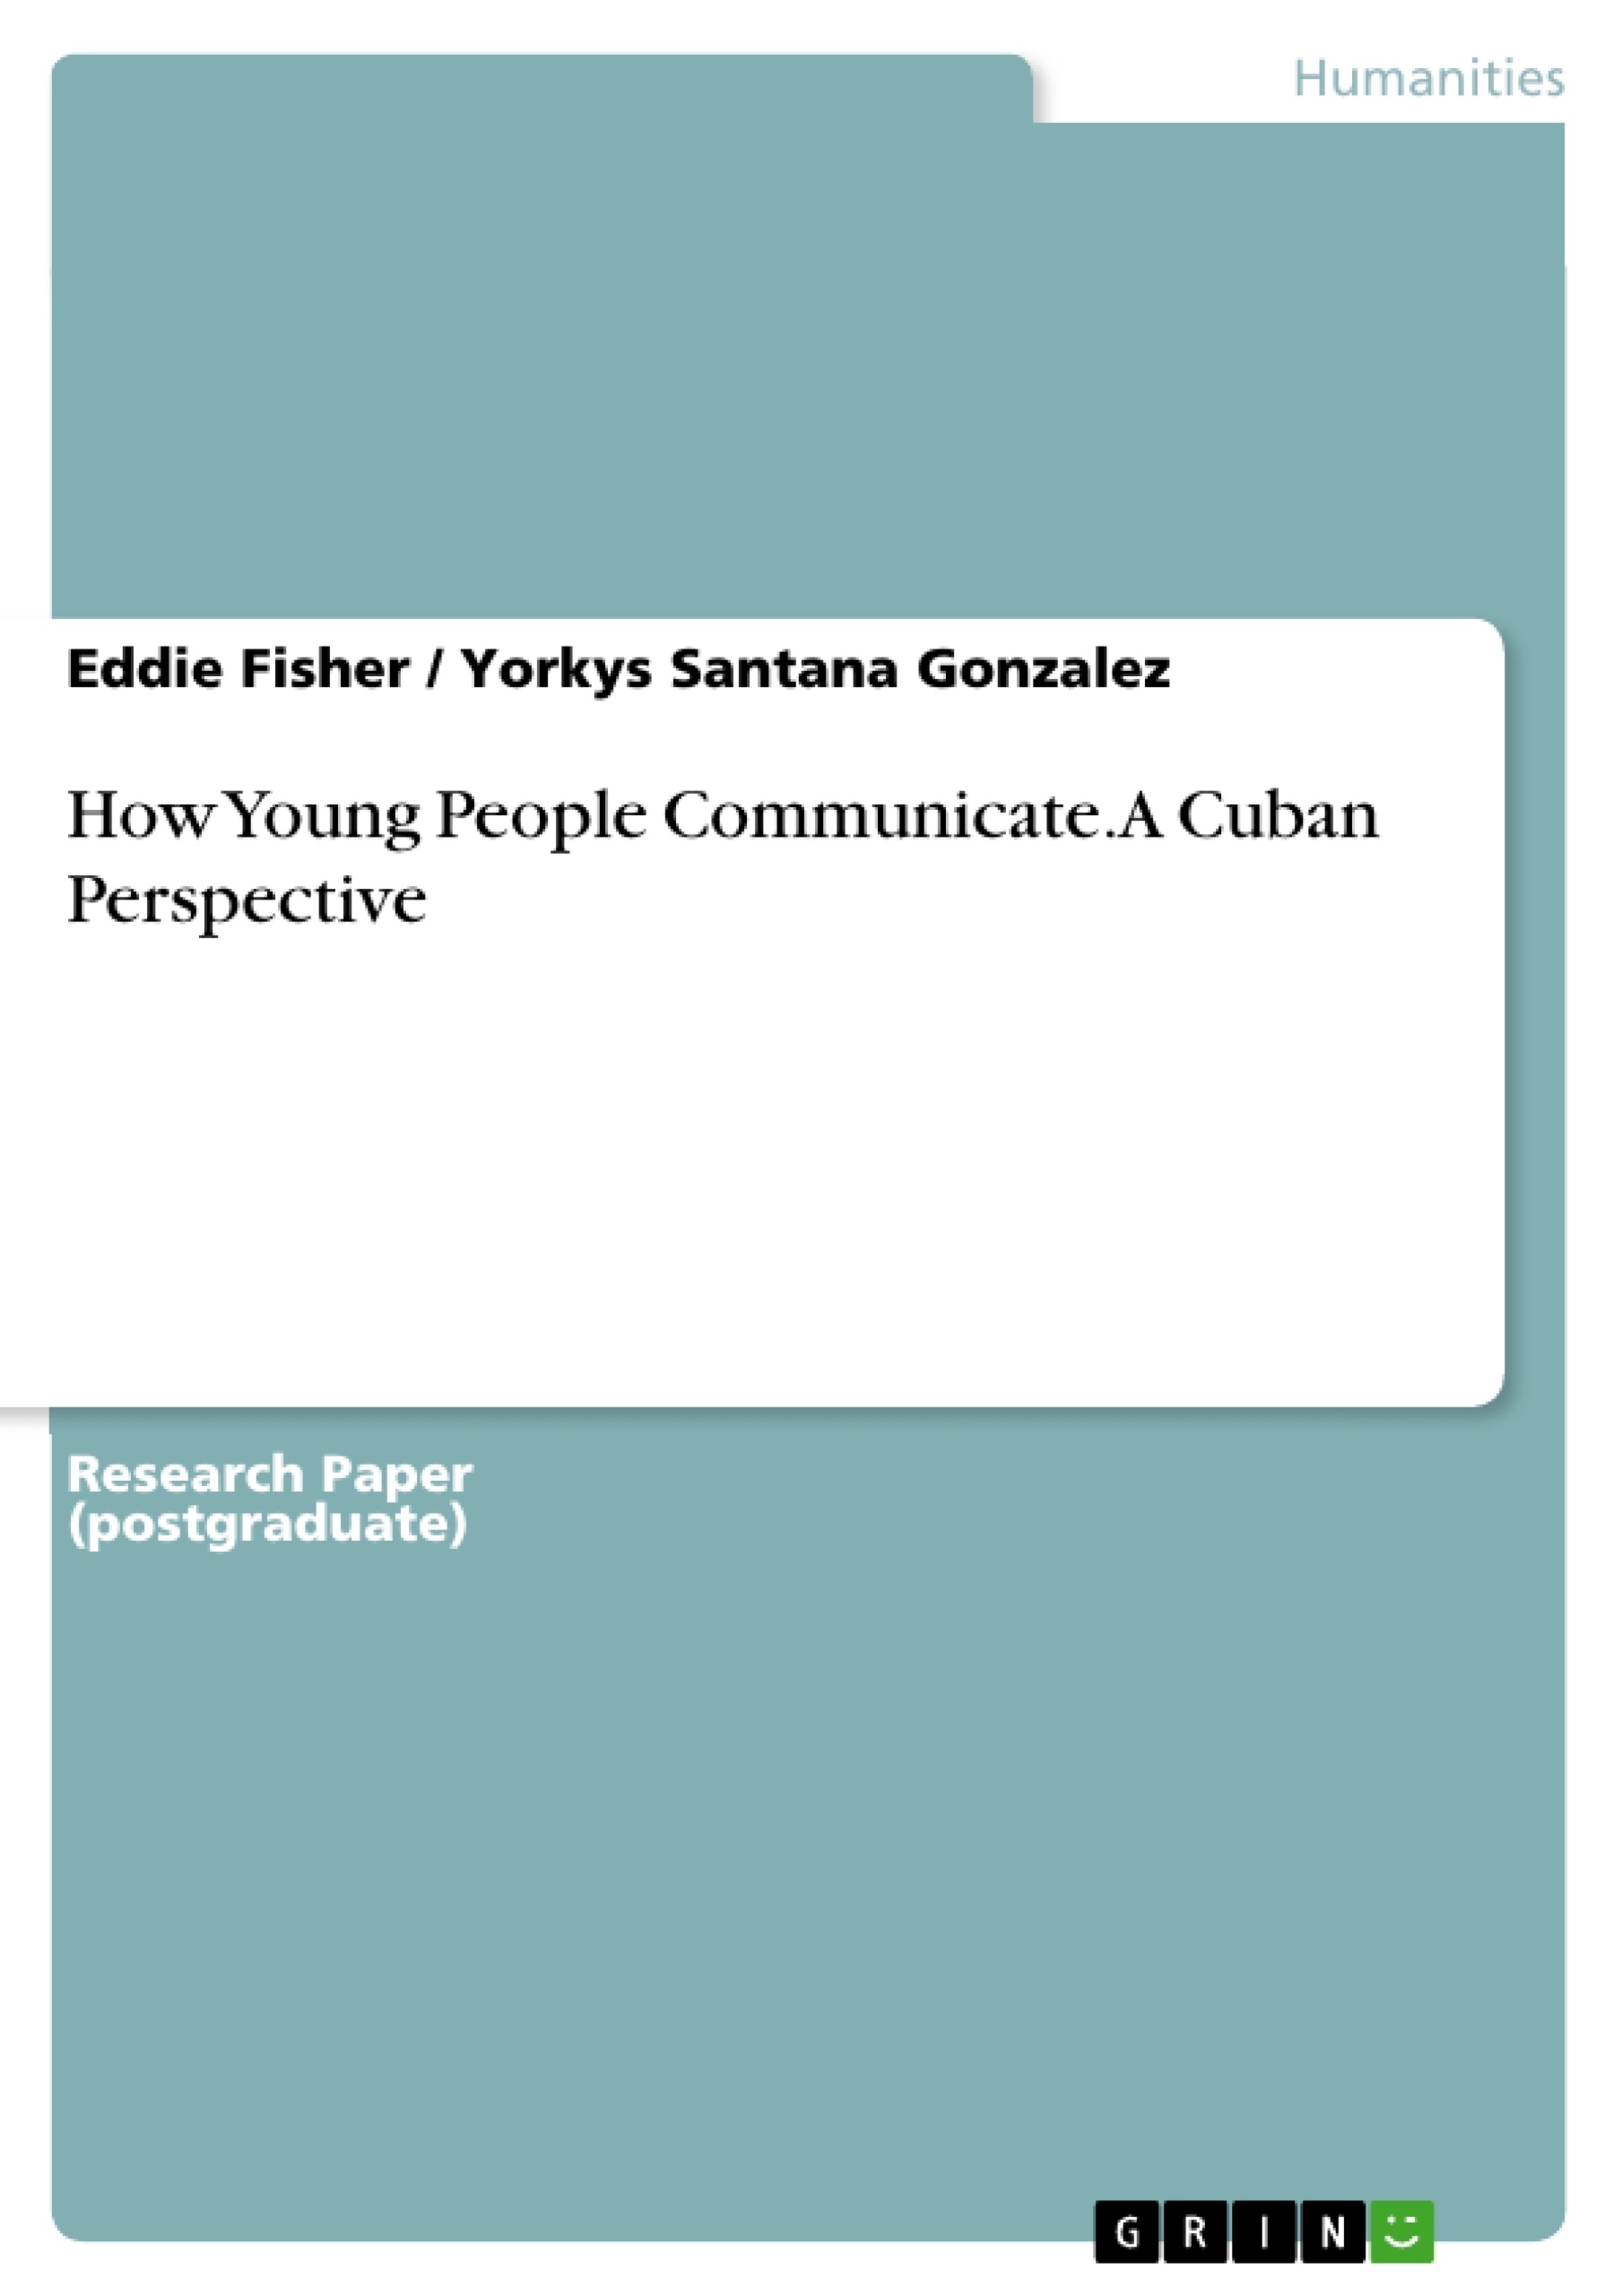 Title: How Young People Communicate. A Cuban Perspective